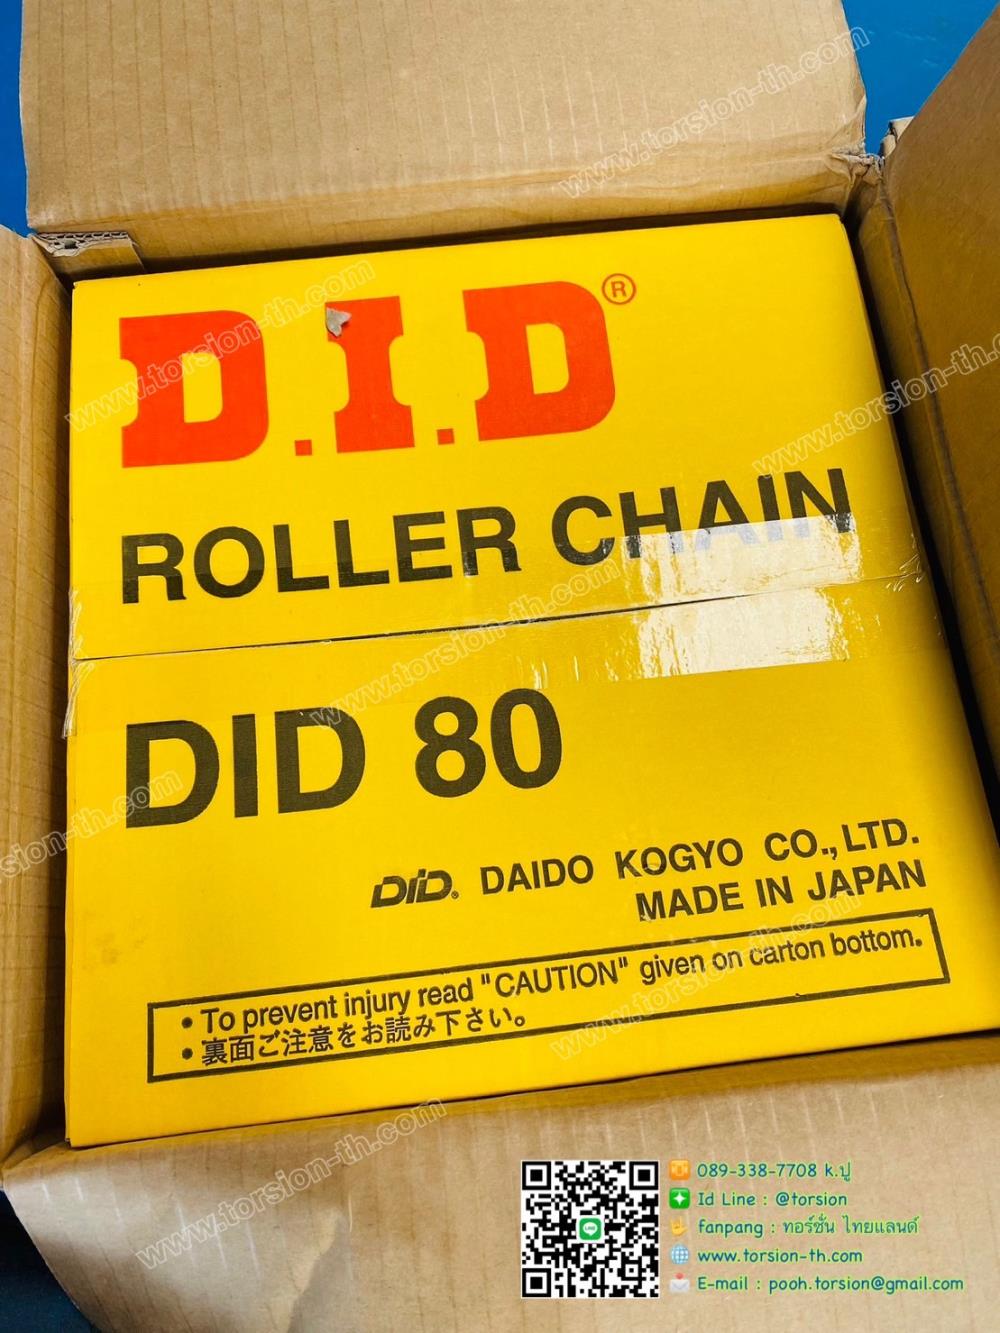 DID Chain Roller เบอร์80 -1R (Made in Japan),Chain , Chains , โซ่ , โซ่ขับ , โซ่อุตสาหกรรม , โซ่เหล็ก , DID , โซ่เบอร์80,DID,Hardware and Consumable/Chains